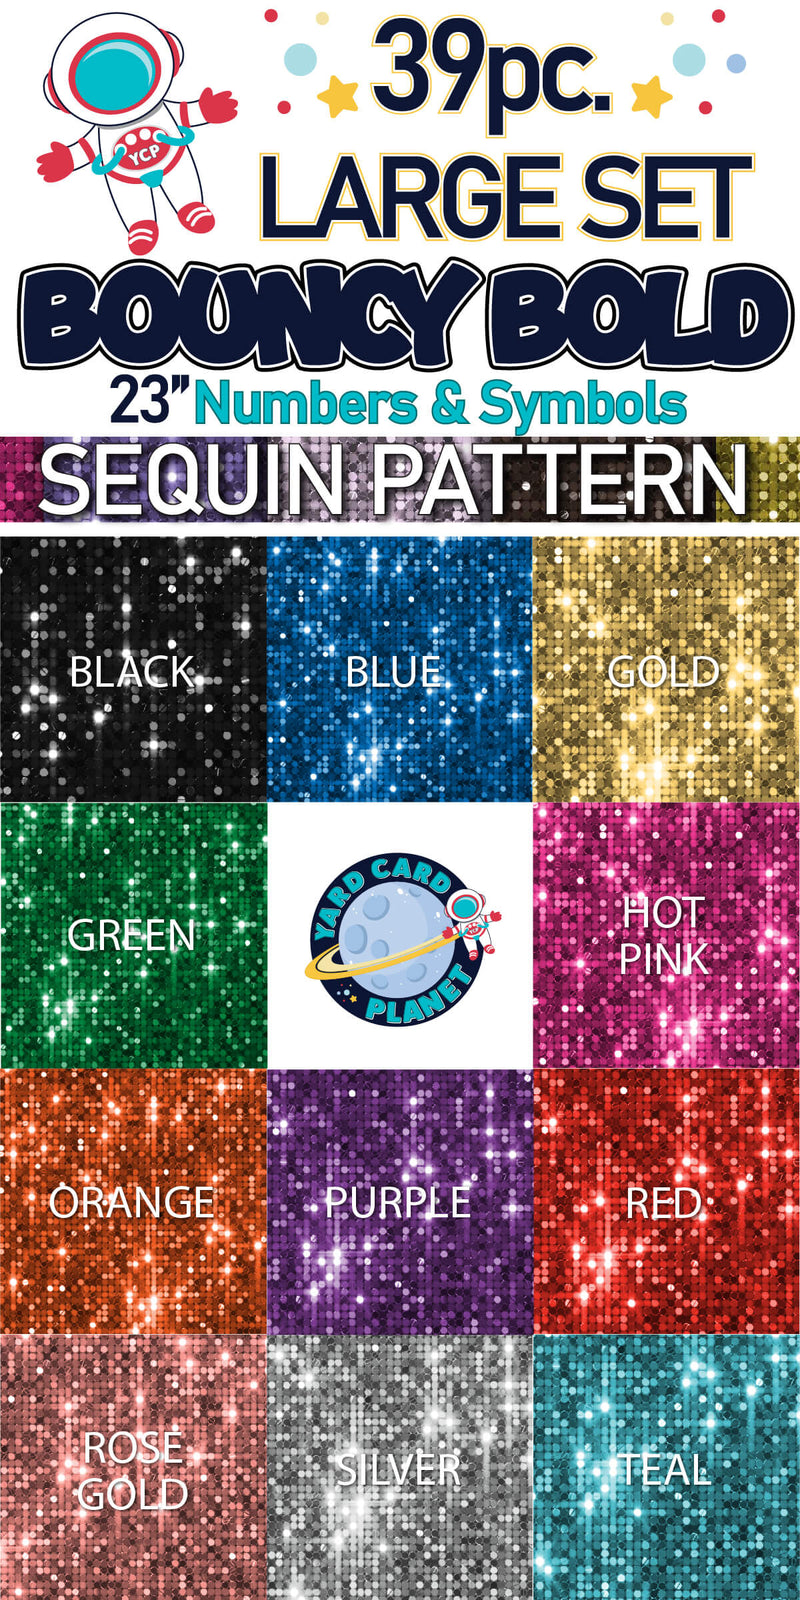 23" Bouncy Bold BB 39 pc. Numbers and Symbols Set in Sequin Pattern